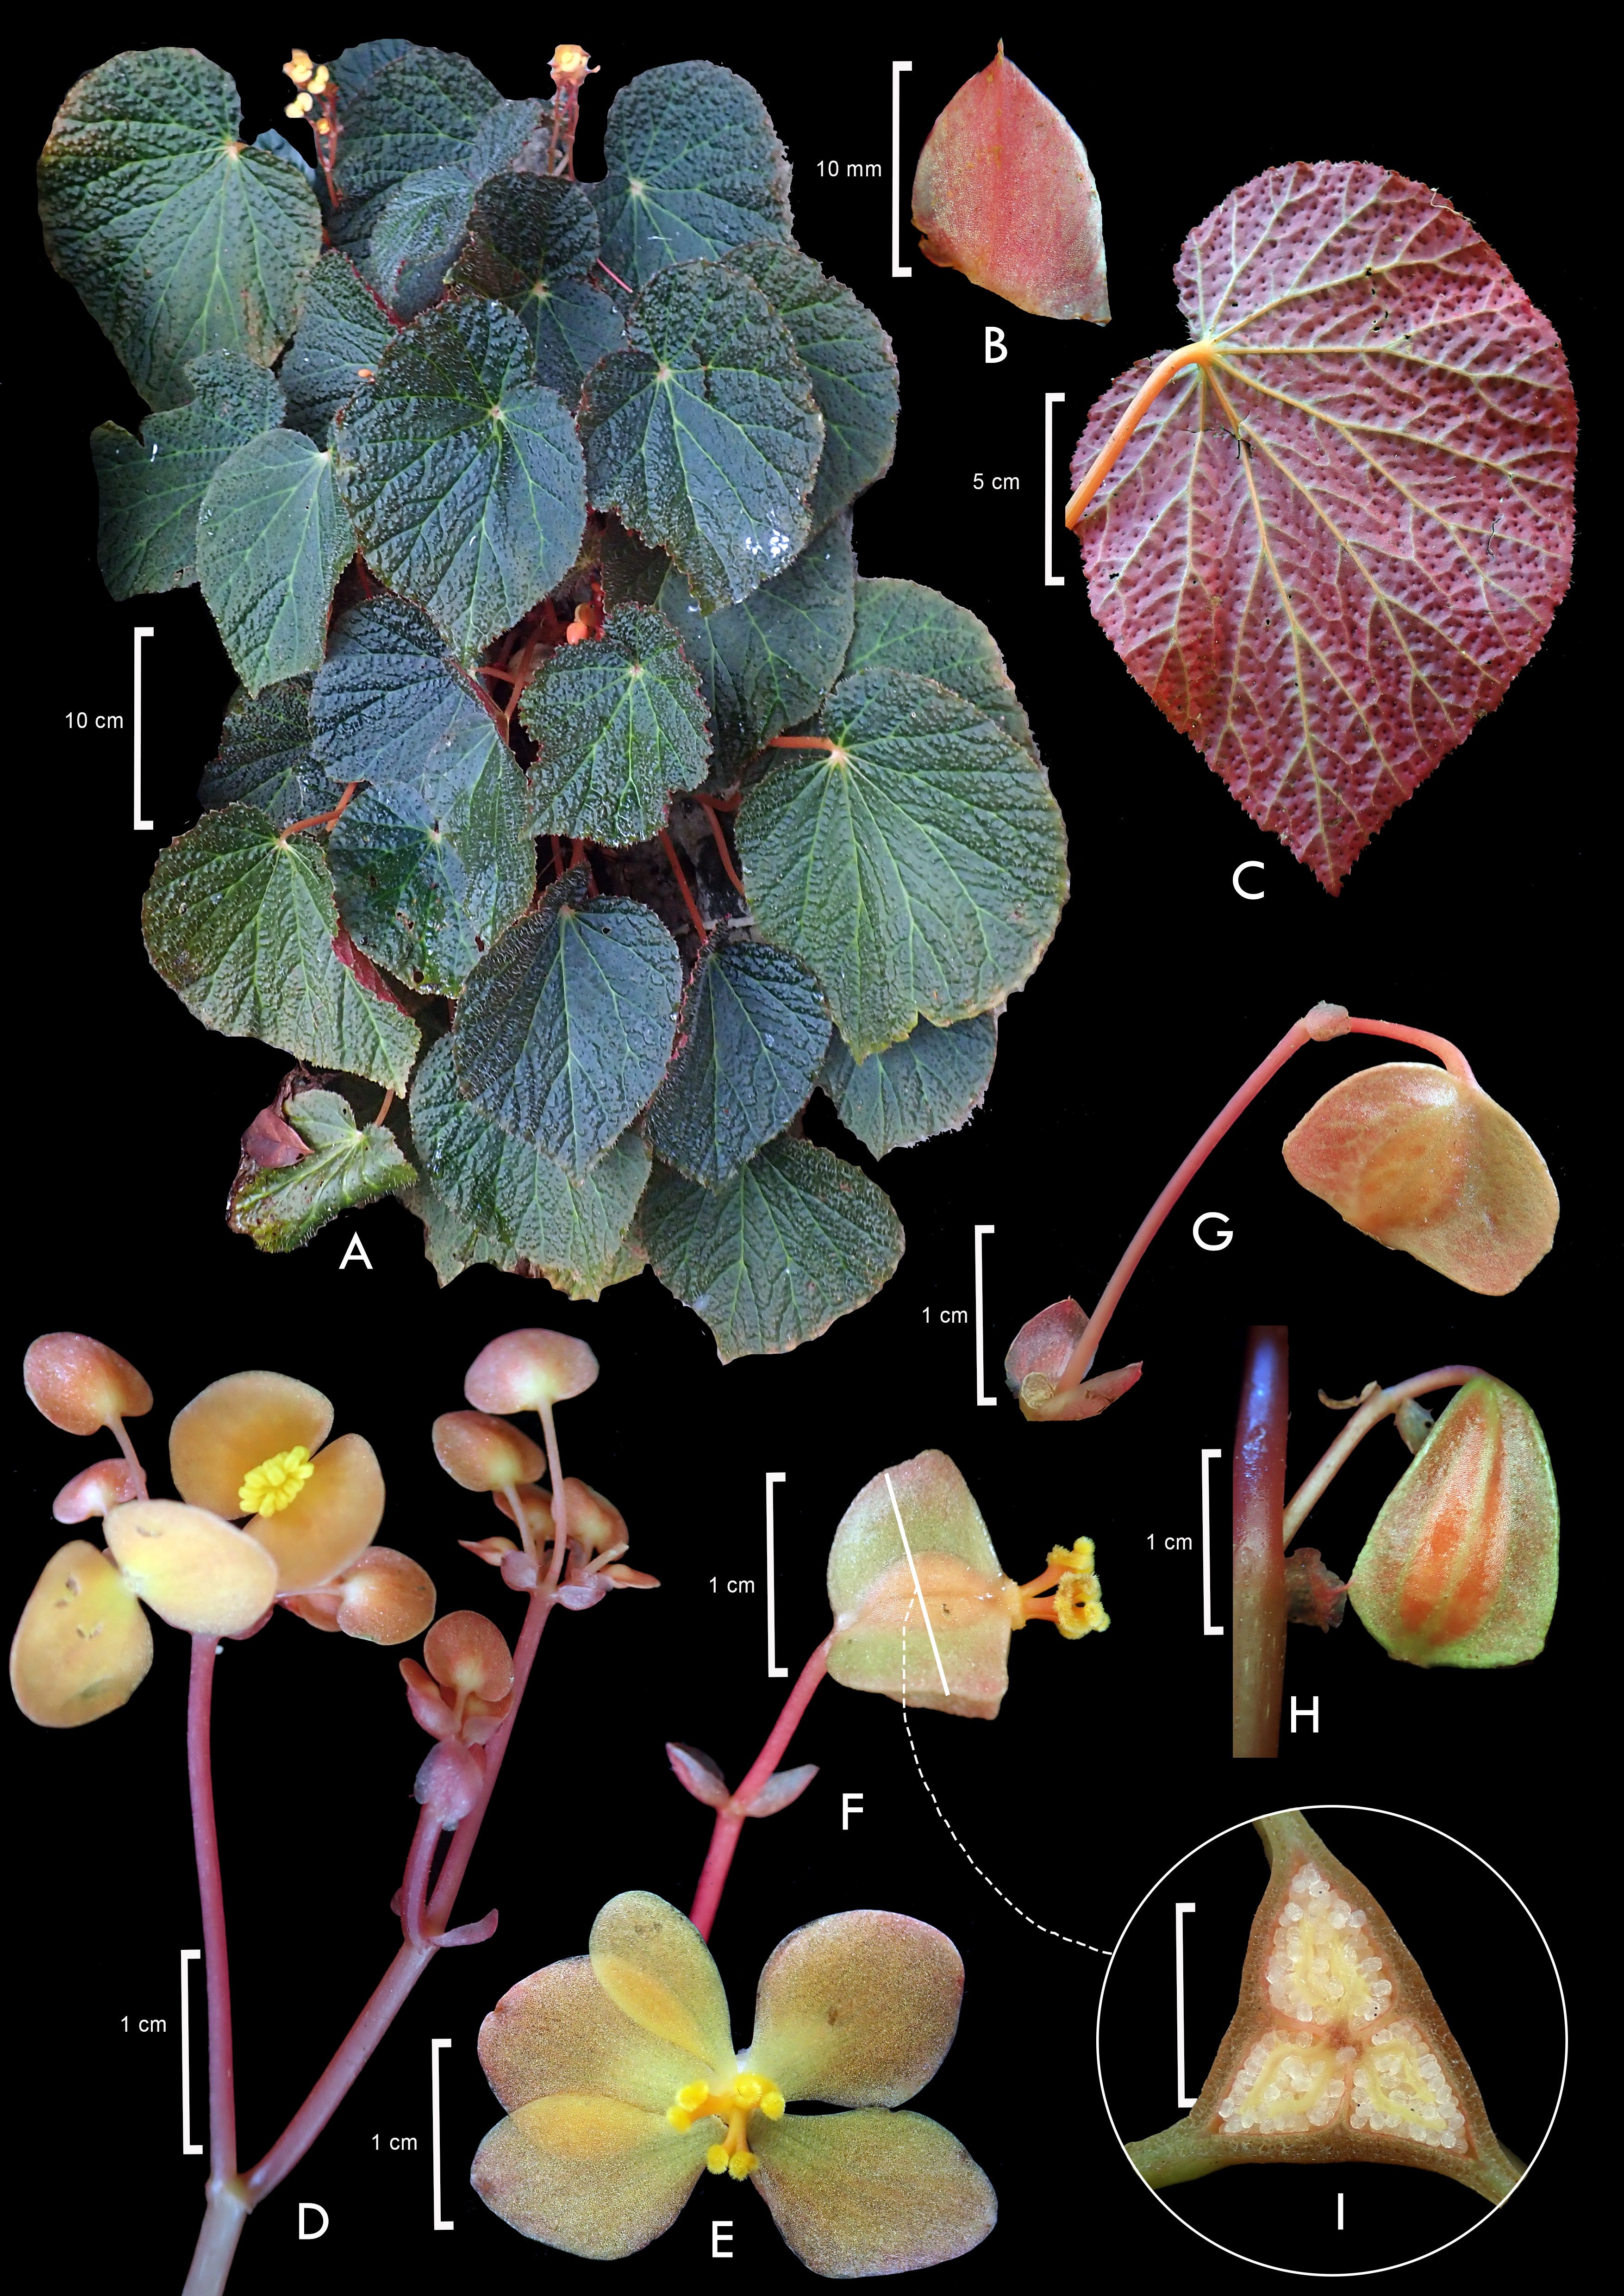 An image of a Begonia included in the paper